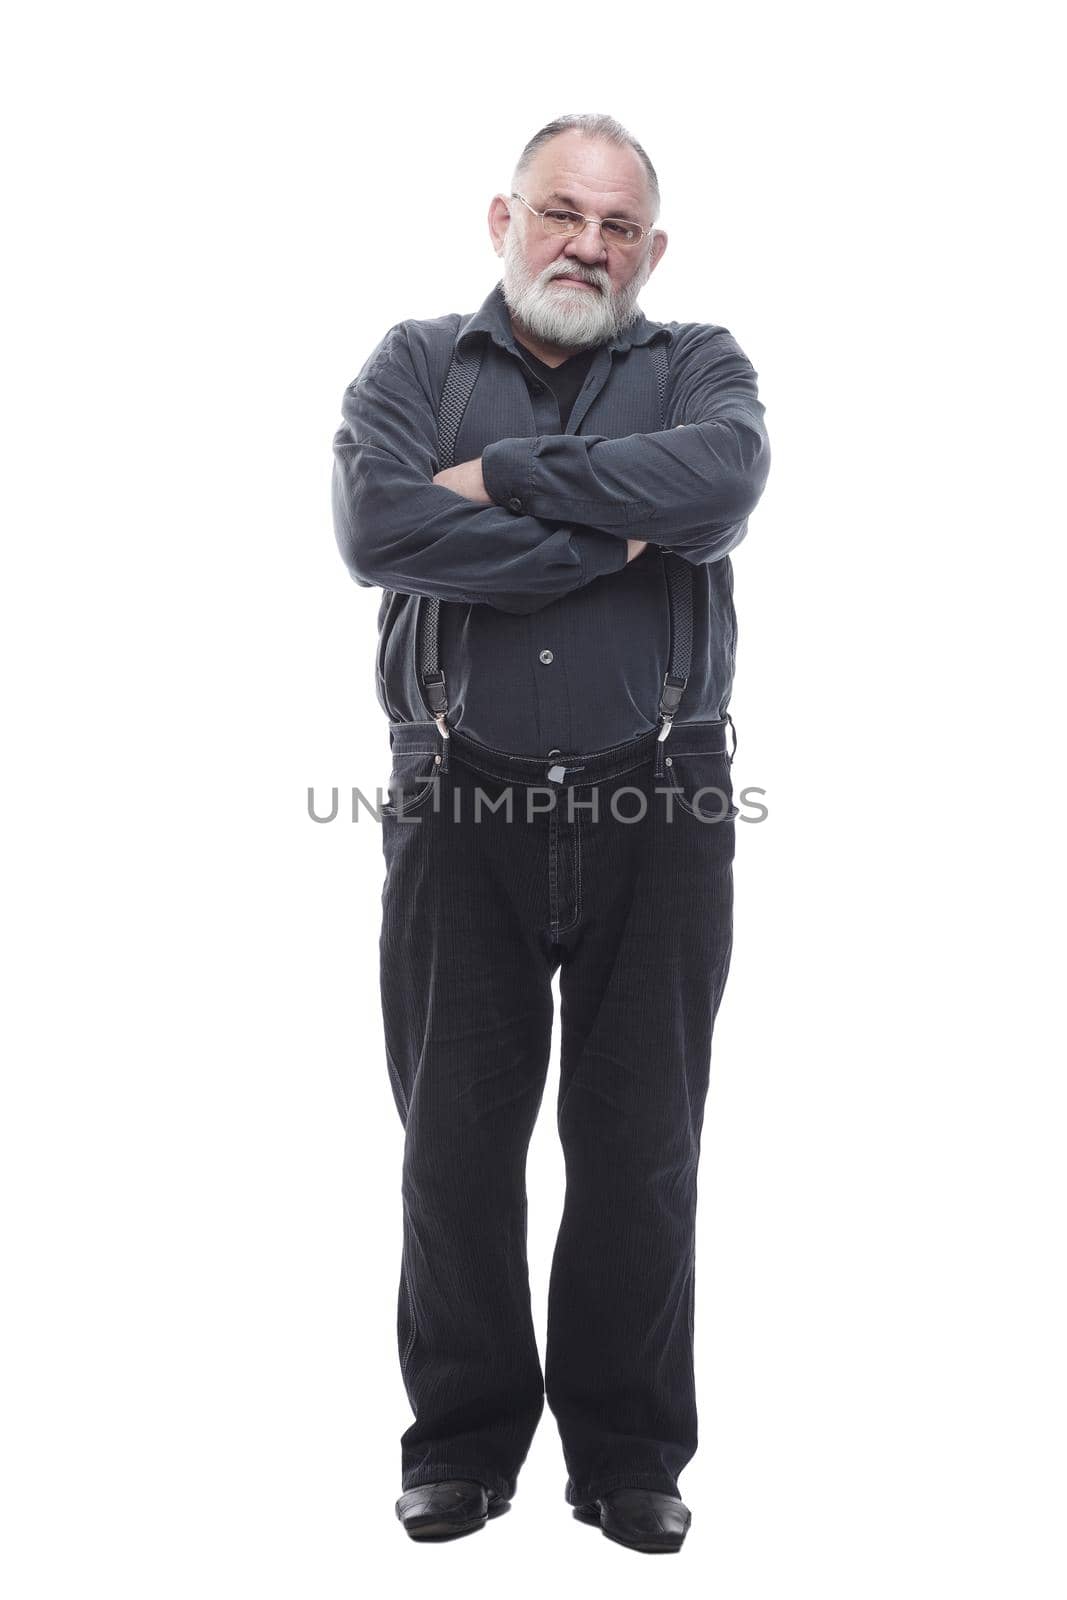 in full growth. a handsome, bearded man in trousers with suspenders. isolated on a white